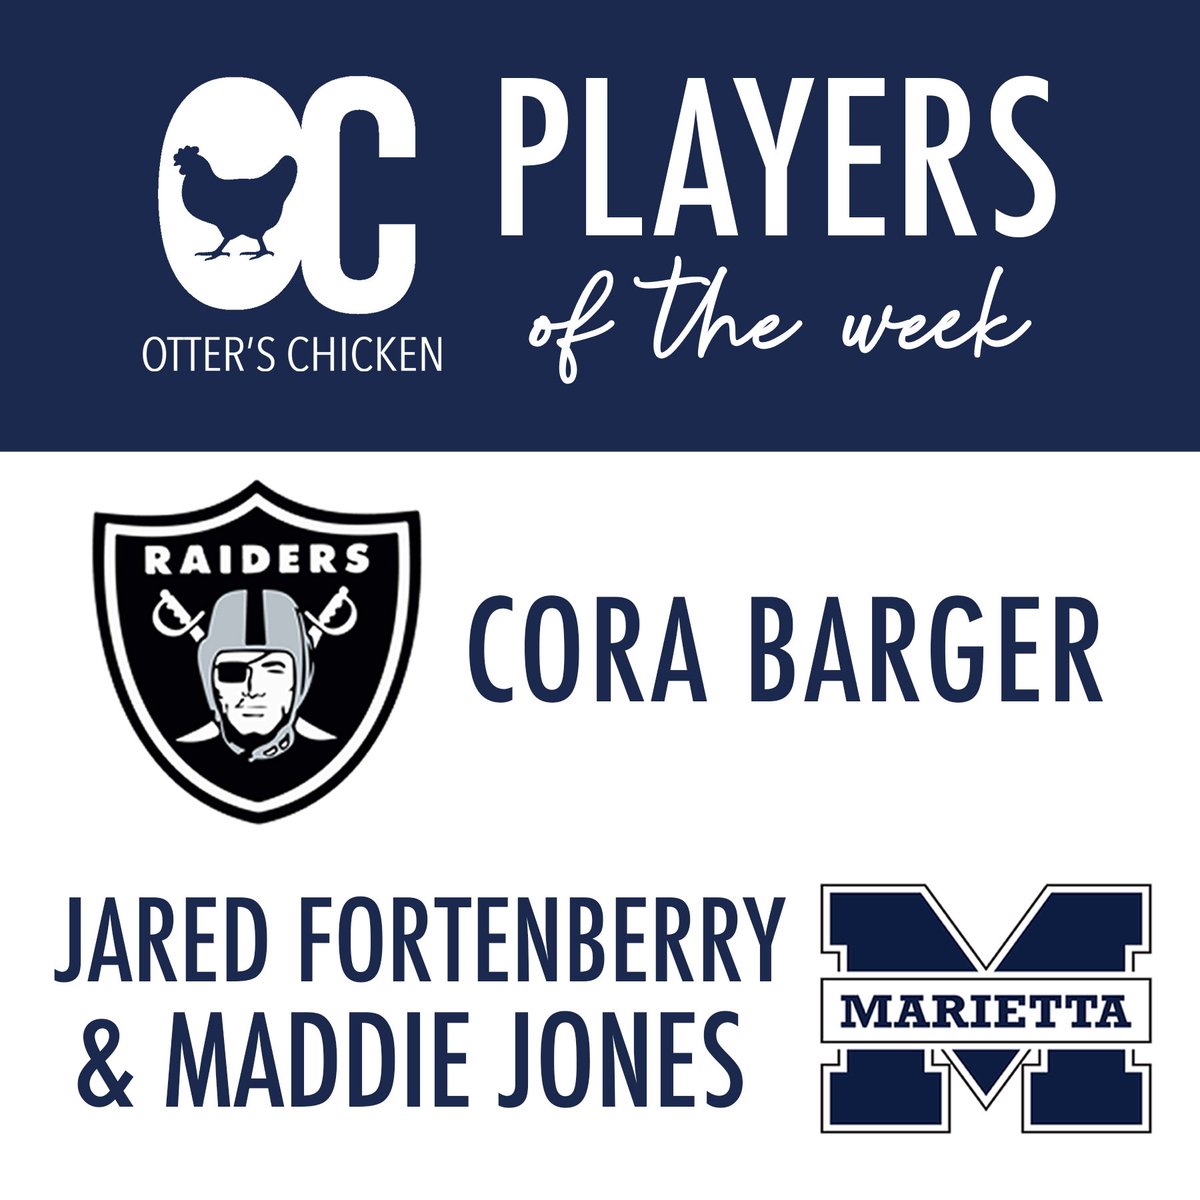 Check out the #PlayersofTheWeek from our Avenue West Cobb location! Enjoy your FREE meal at Otter's! 🐔